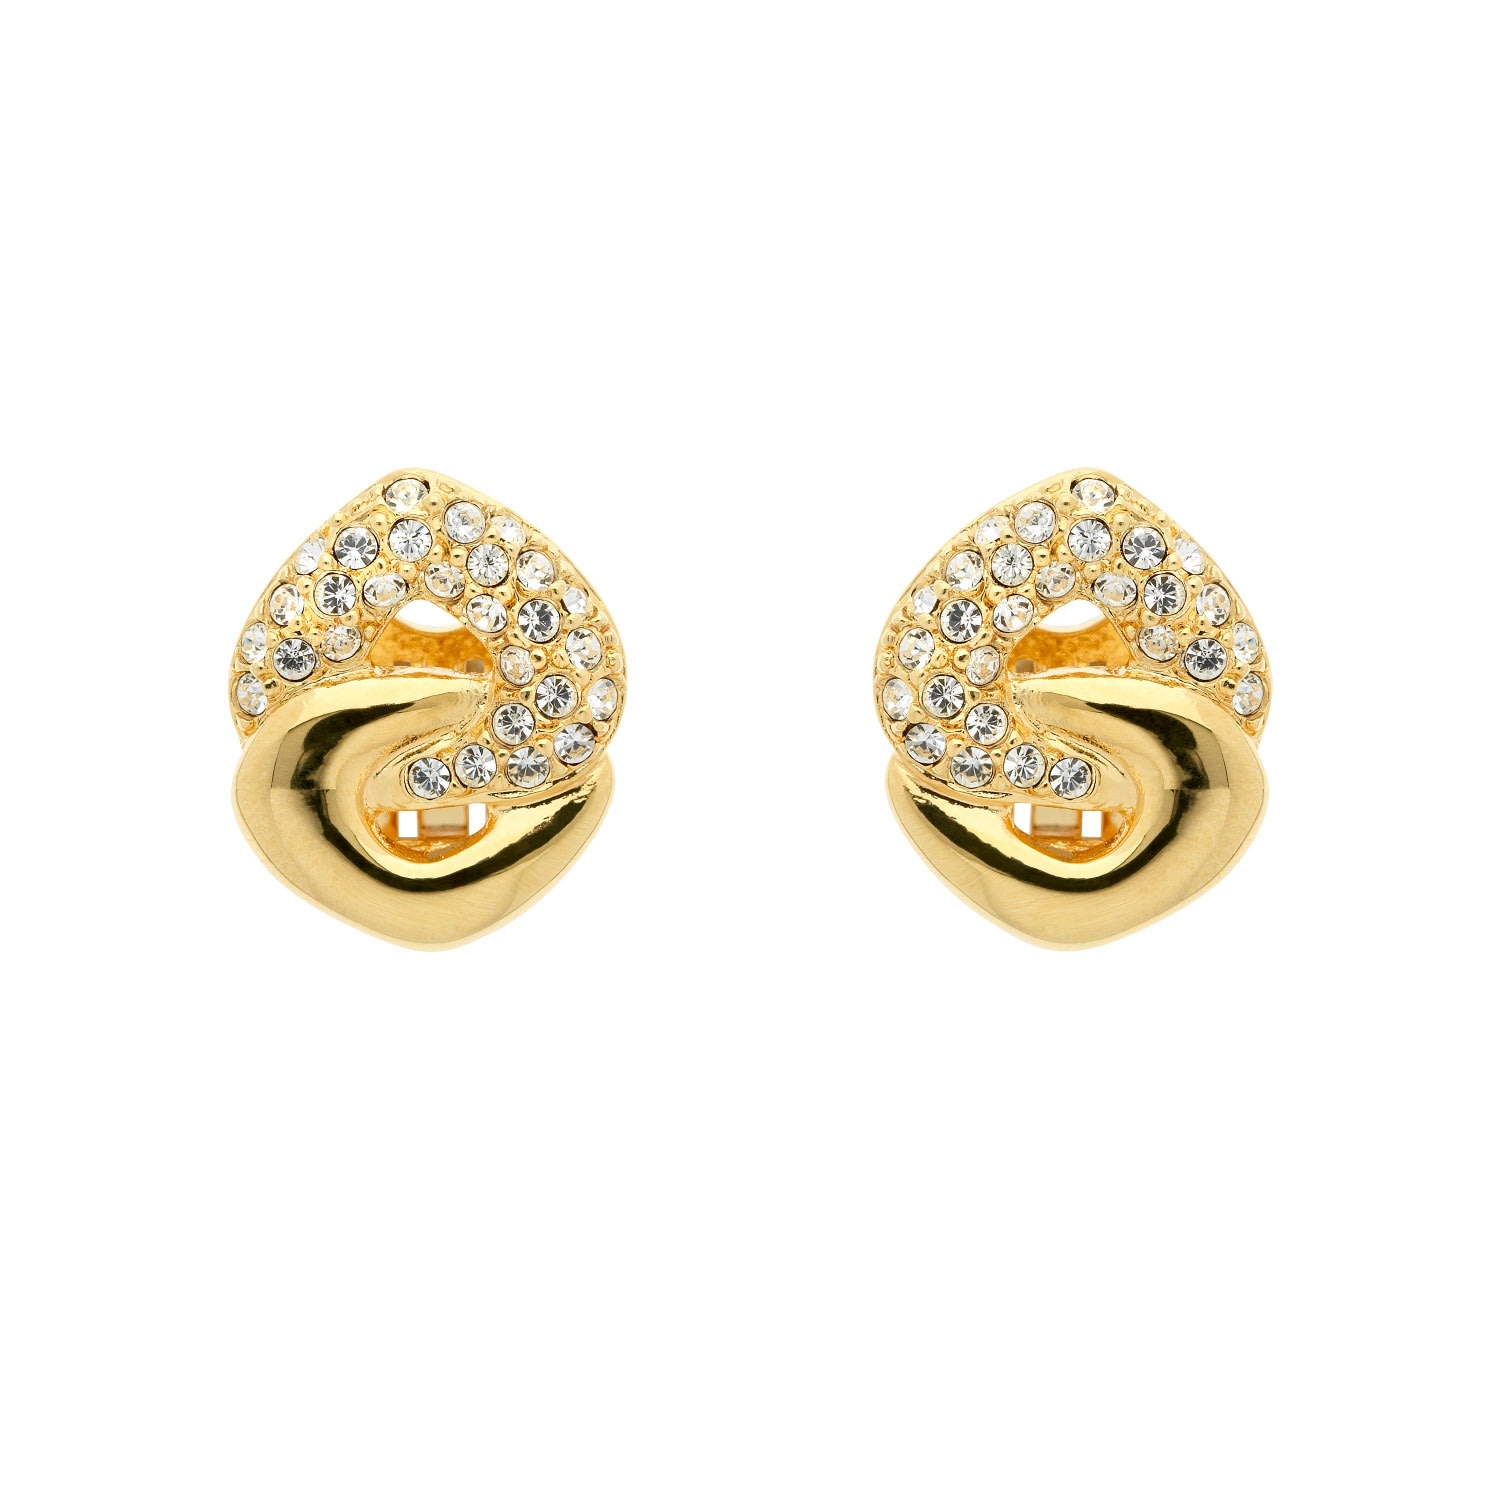 Women’s Gold Pave Crystal Clip On Earrings Emma Holland Jewellery